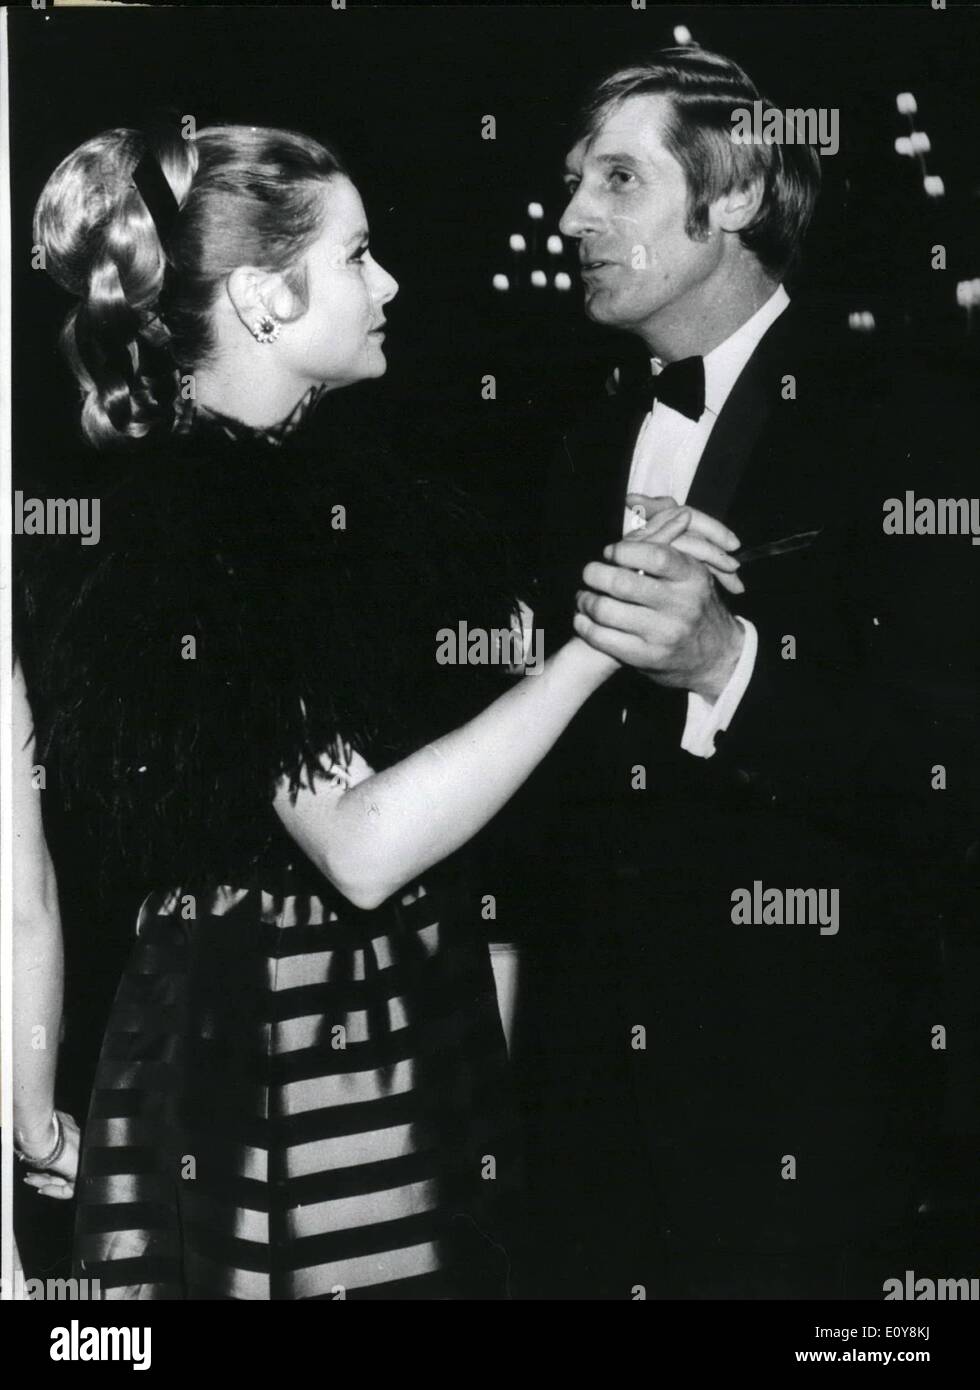 Feb. 02, 1969 - Princes Grace at T.V.Gala Ball: The 9th Television festival ended up with a Brilliant Ball held at the Winter Spoting of Monte Carlo last night. Photo shows Princess Grace dancing with the famous American T.V. actor Edward Meeks. Stock Photo